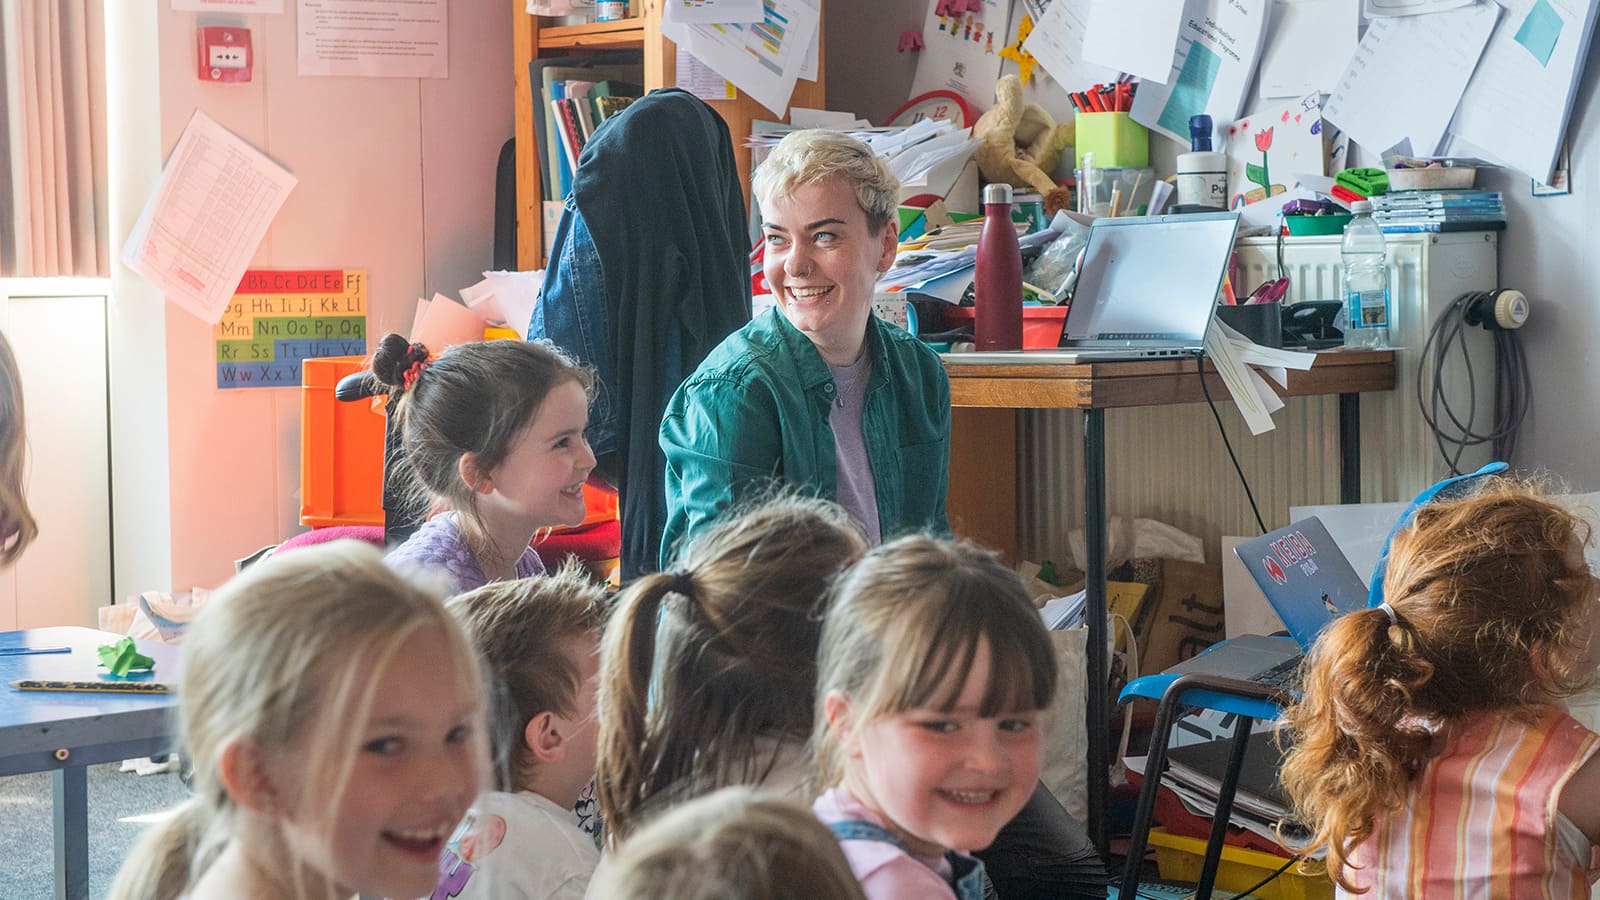 A woman in blue shirt sits amongst a group of young children in a primary school classroom